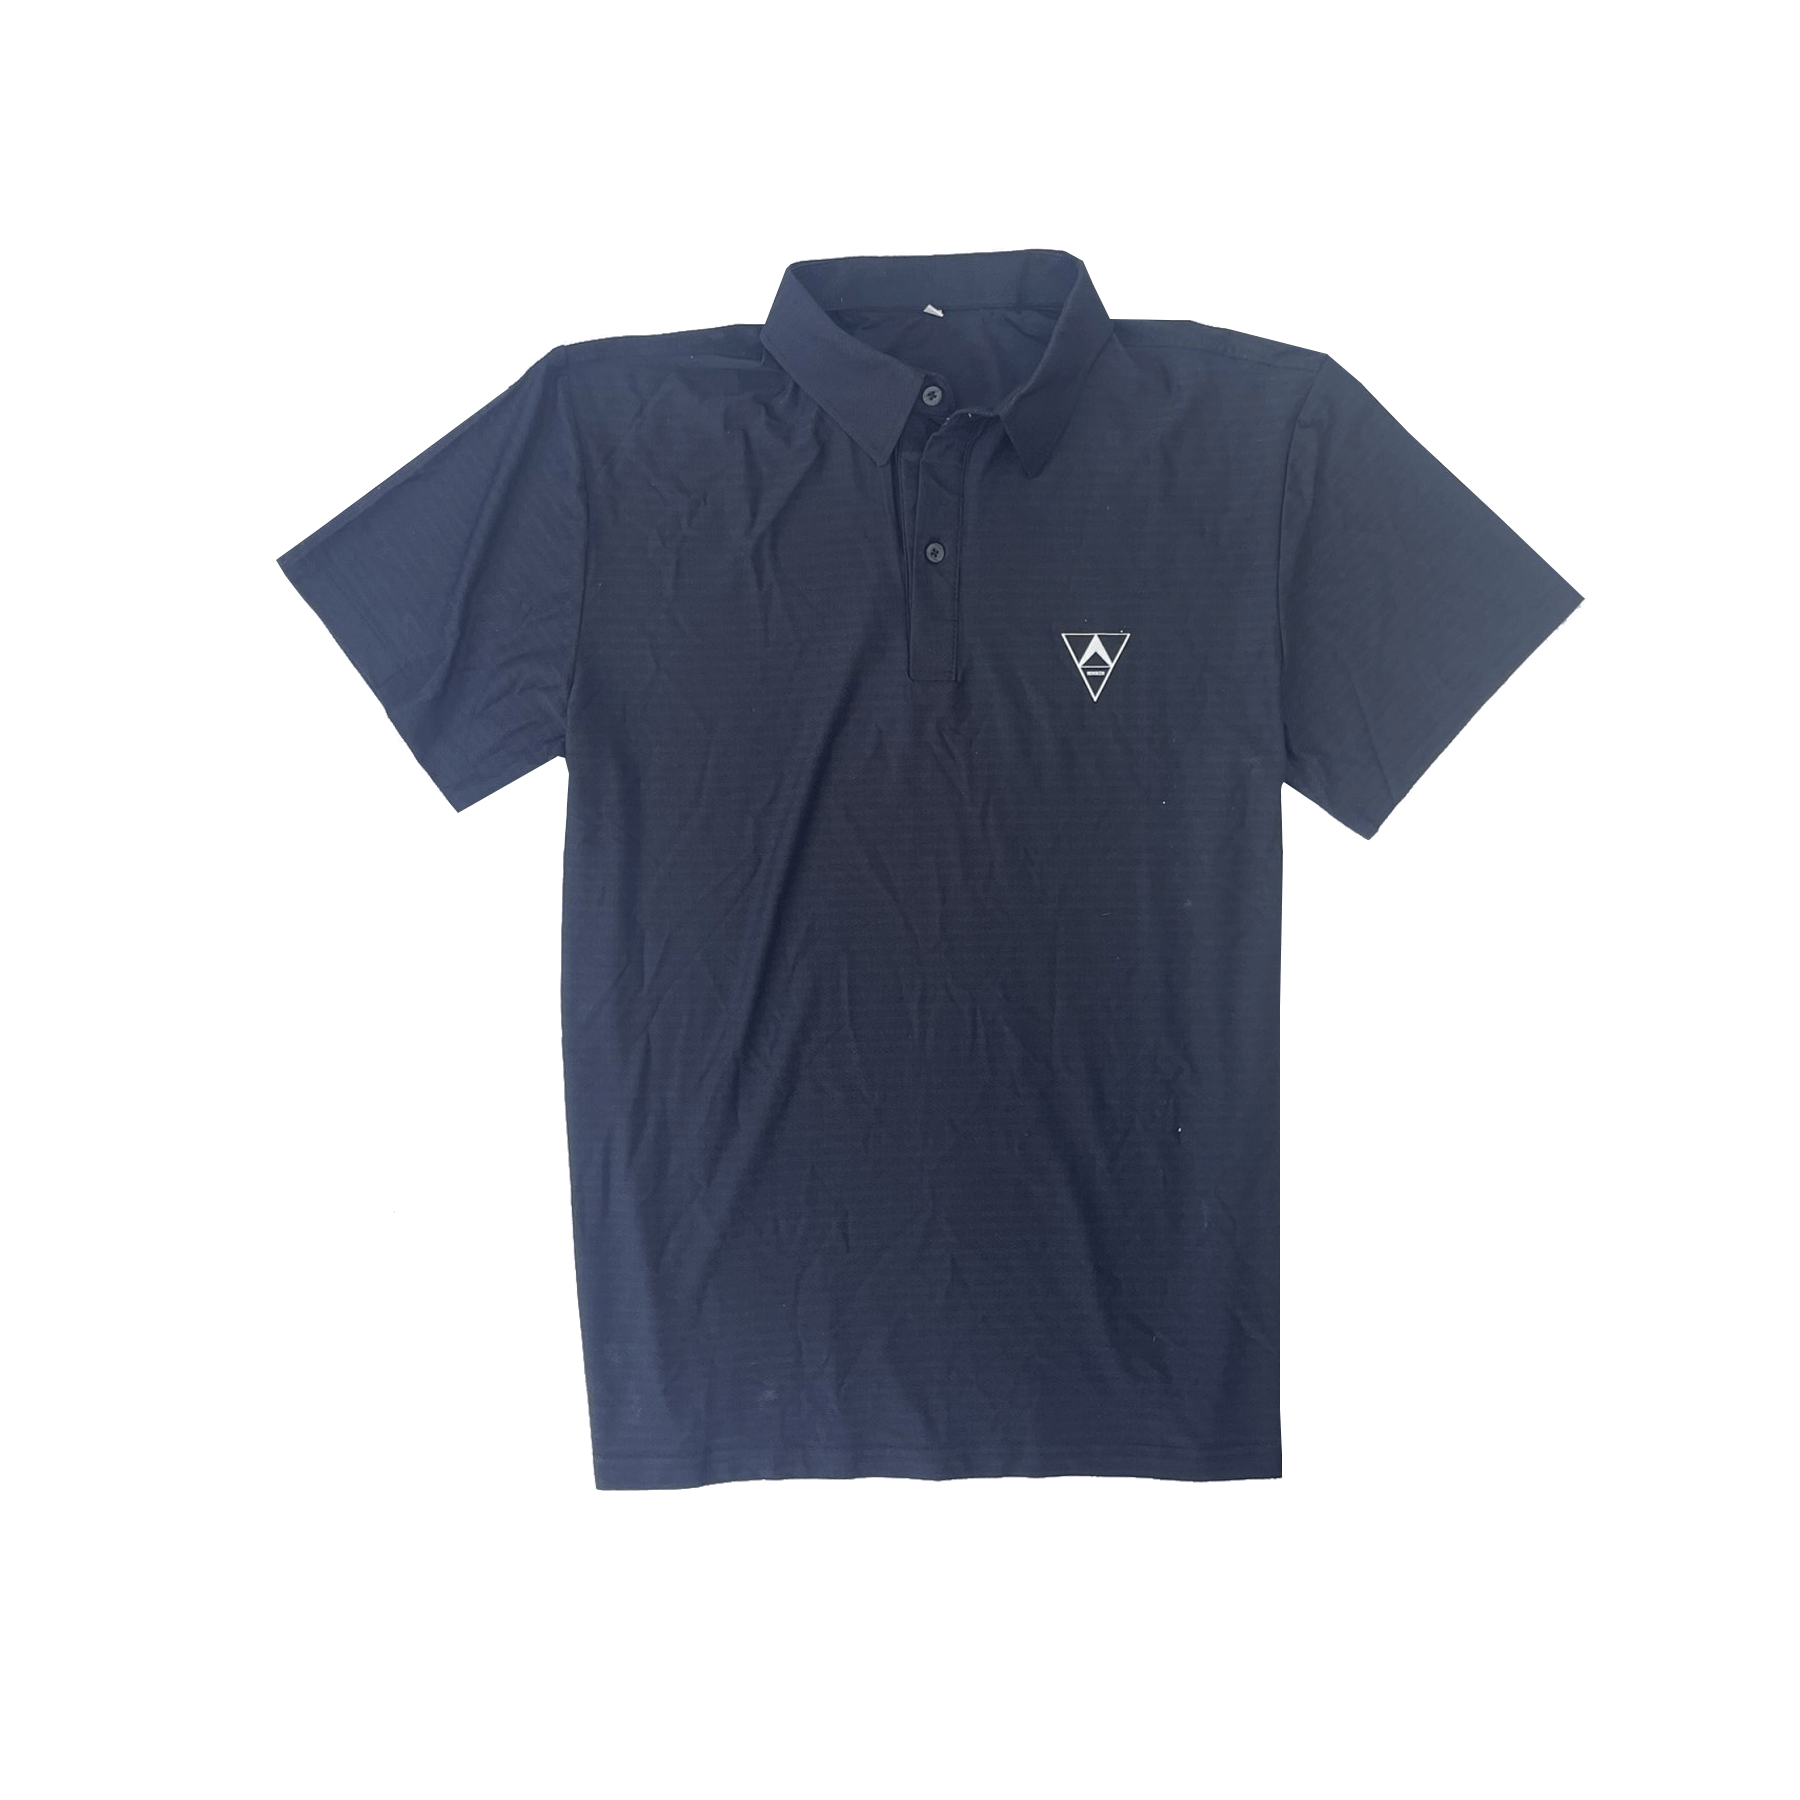 Plain Polo T-Shirt Short Sleeve High Quality Ready To Ship 2023 Customized Packaging From Vietnam Manufacturer 7